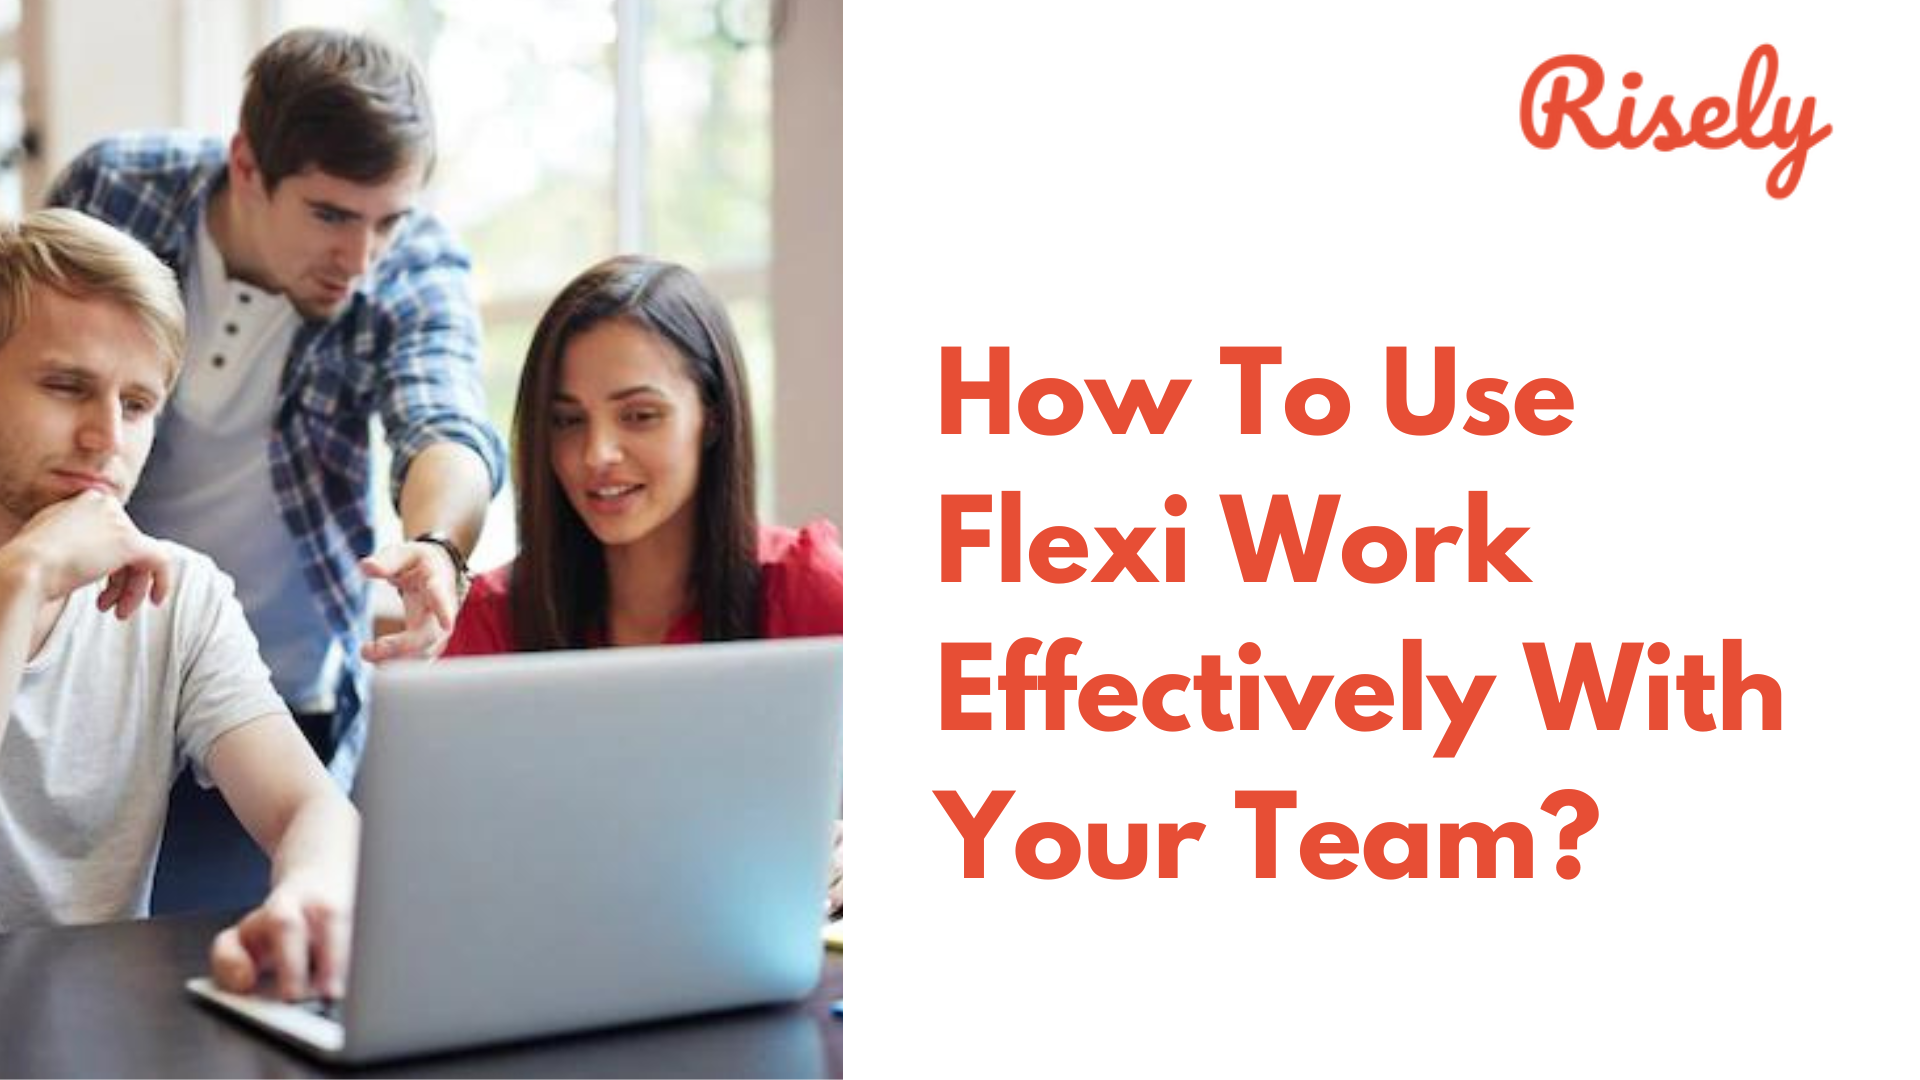 How To Use Flexi Work Effectively With Your Team?